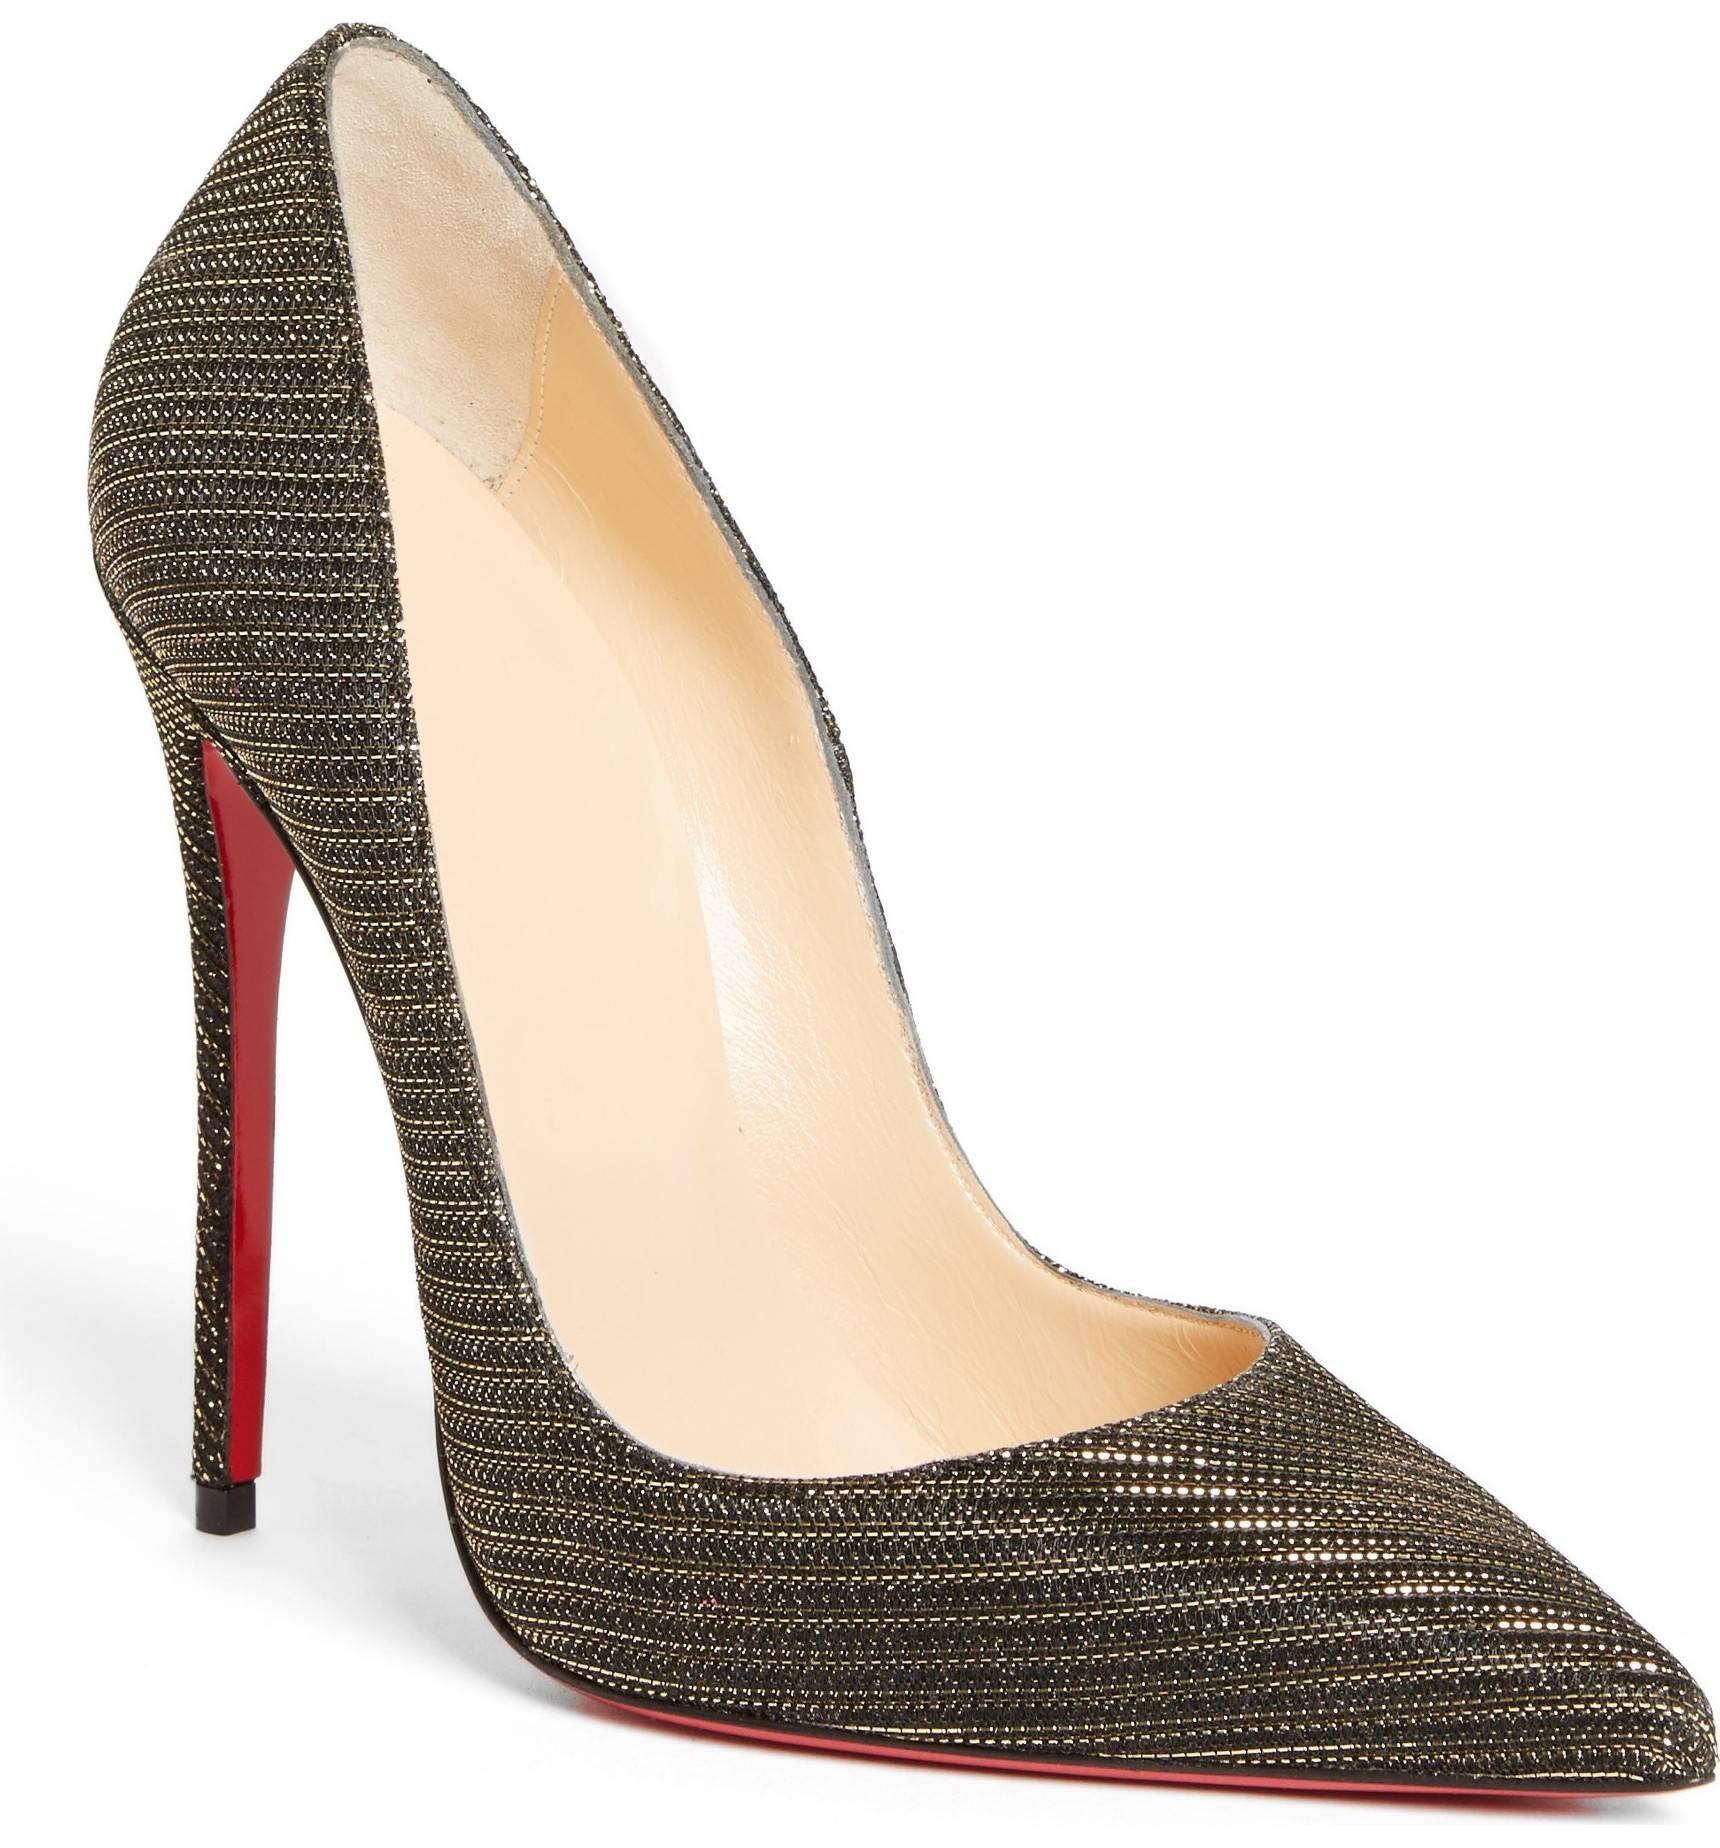 CURATOR'S NOTES

Christian Louboutin New Black Gold Glitter So Kate Evening High Heels Pumps in Box

Size IT 36.5" - Not your size?  Message us for help to find yours.
Glitter fabric
Slip on 
Made in Italy
Heel height 4.75"
Includes